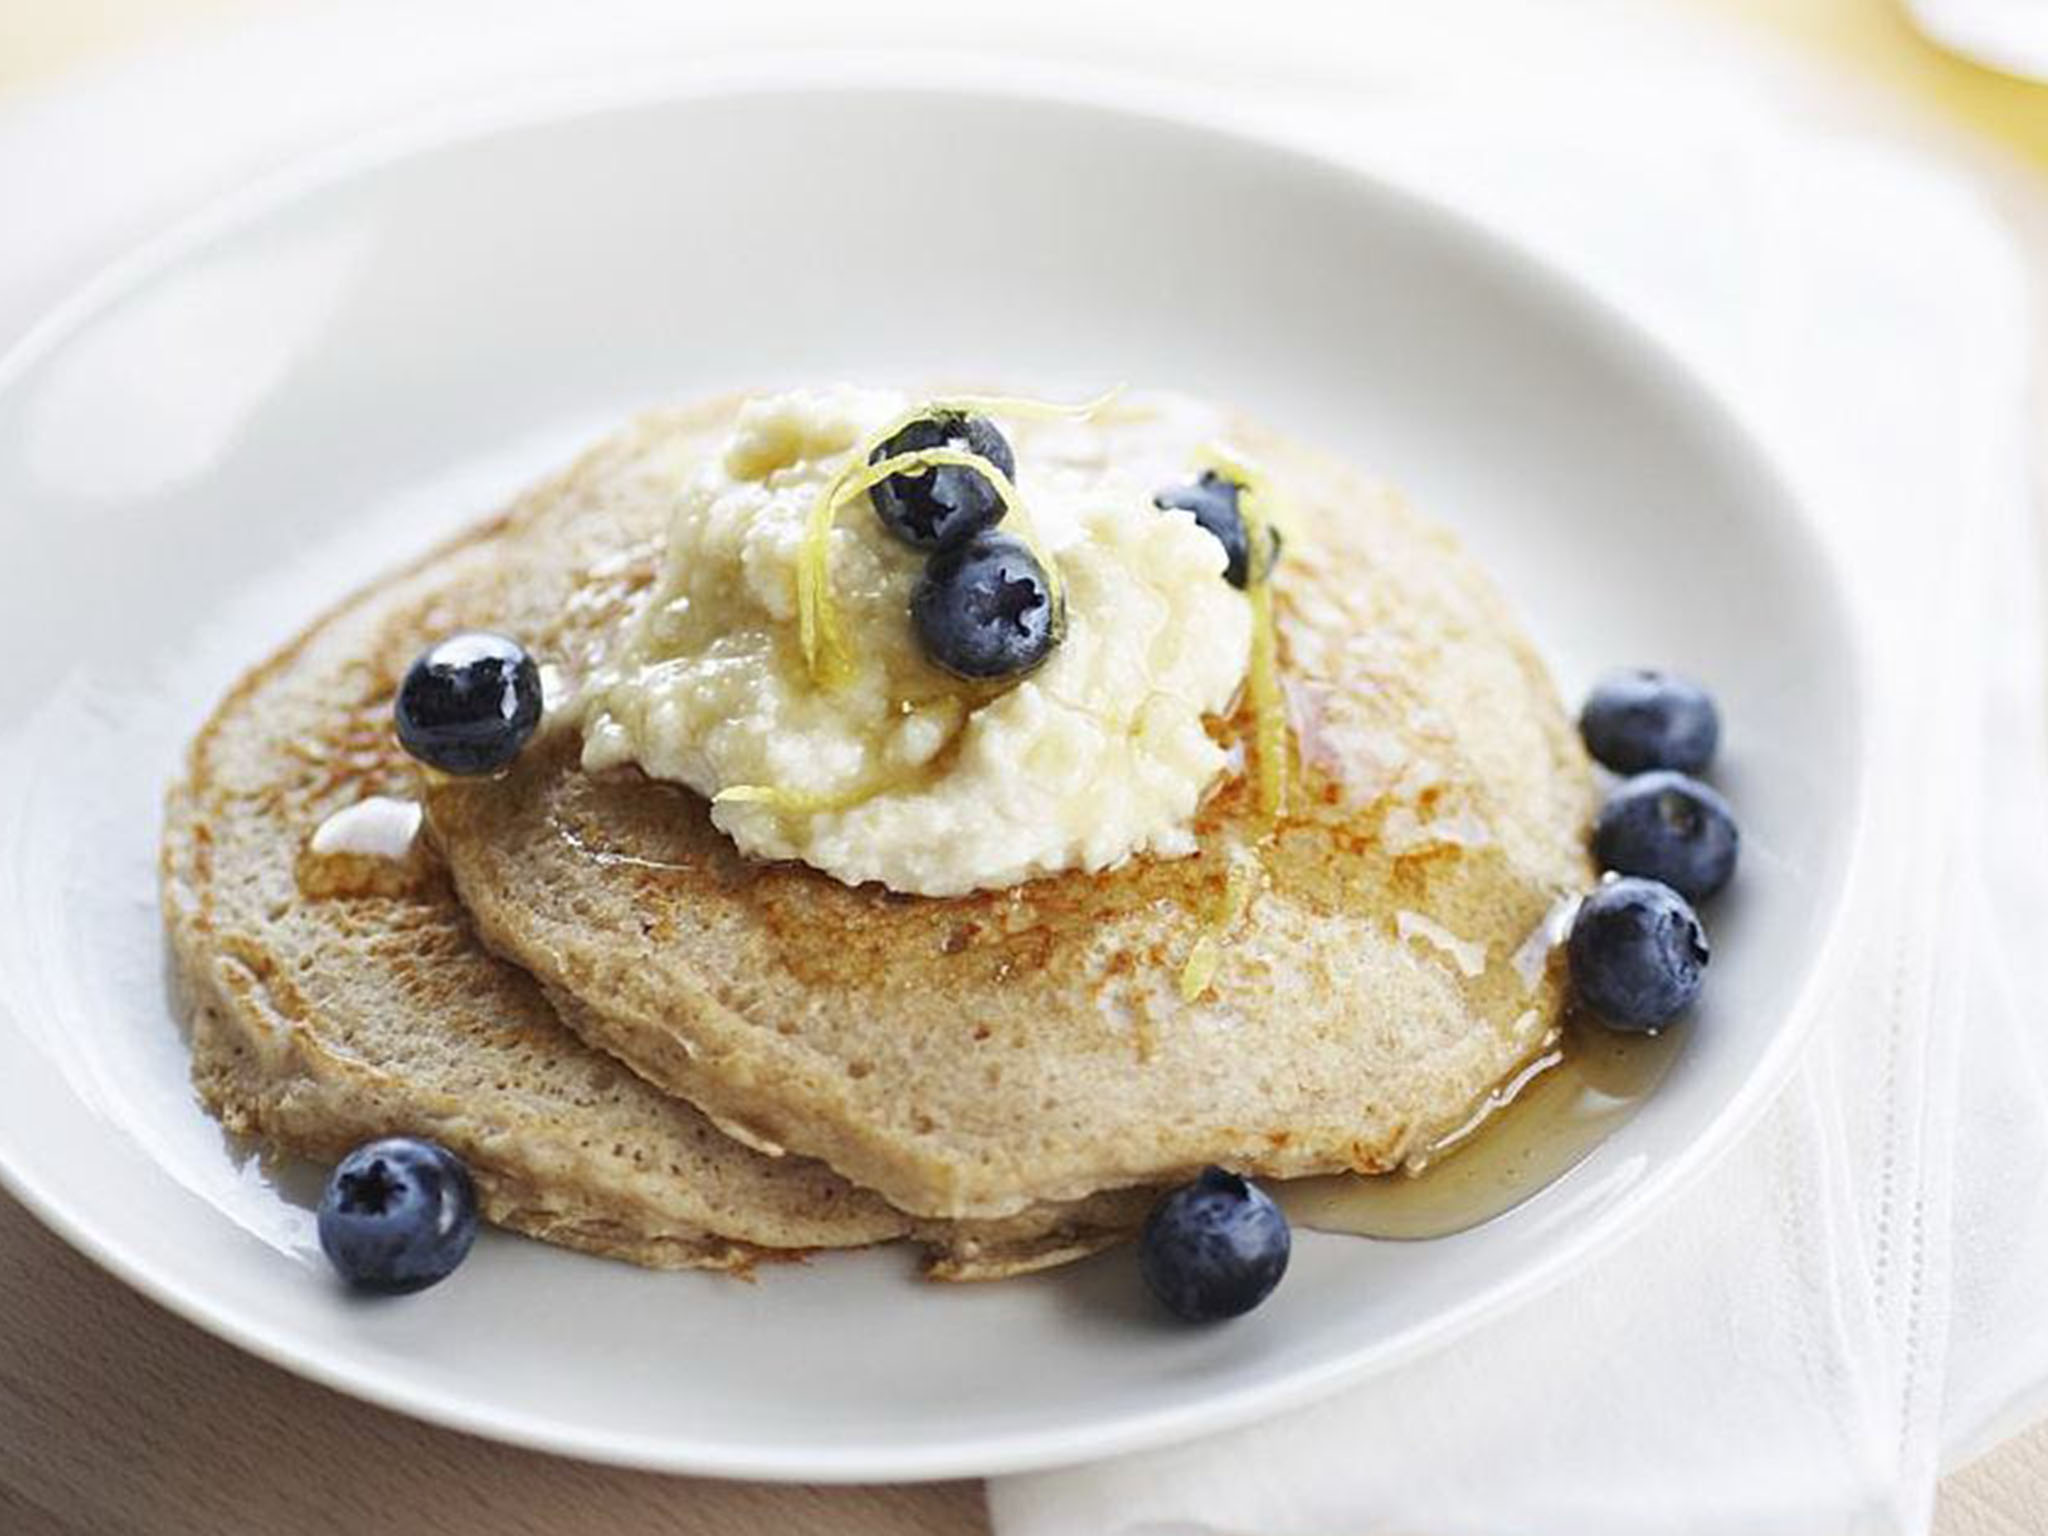 oatcakes with honeyed ricotta and blueberries